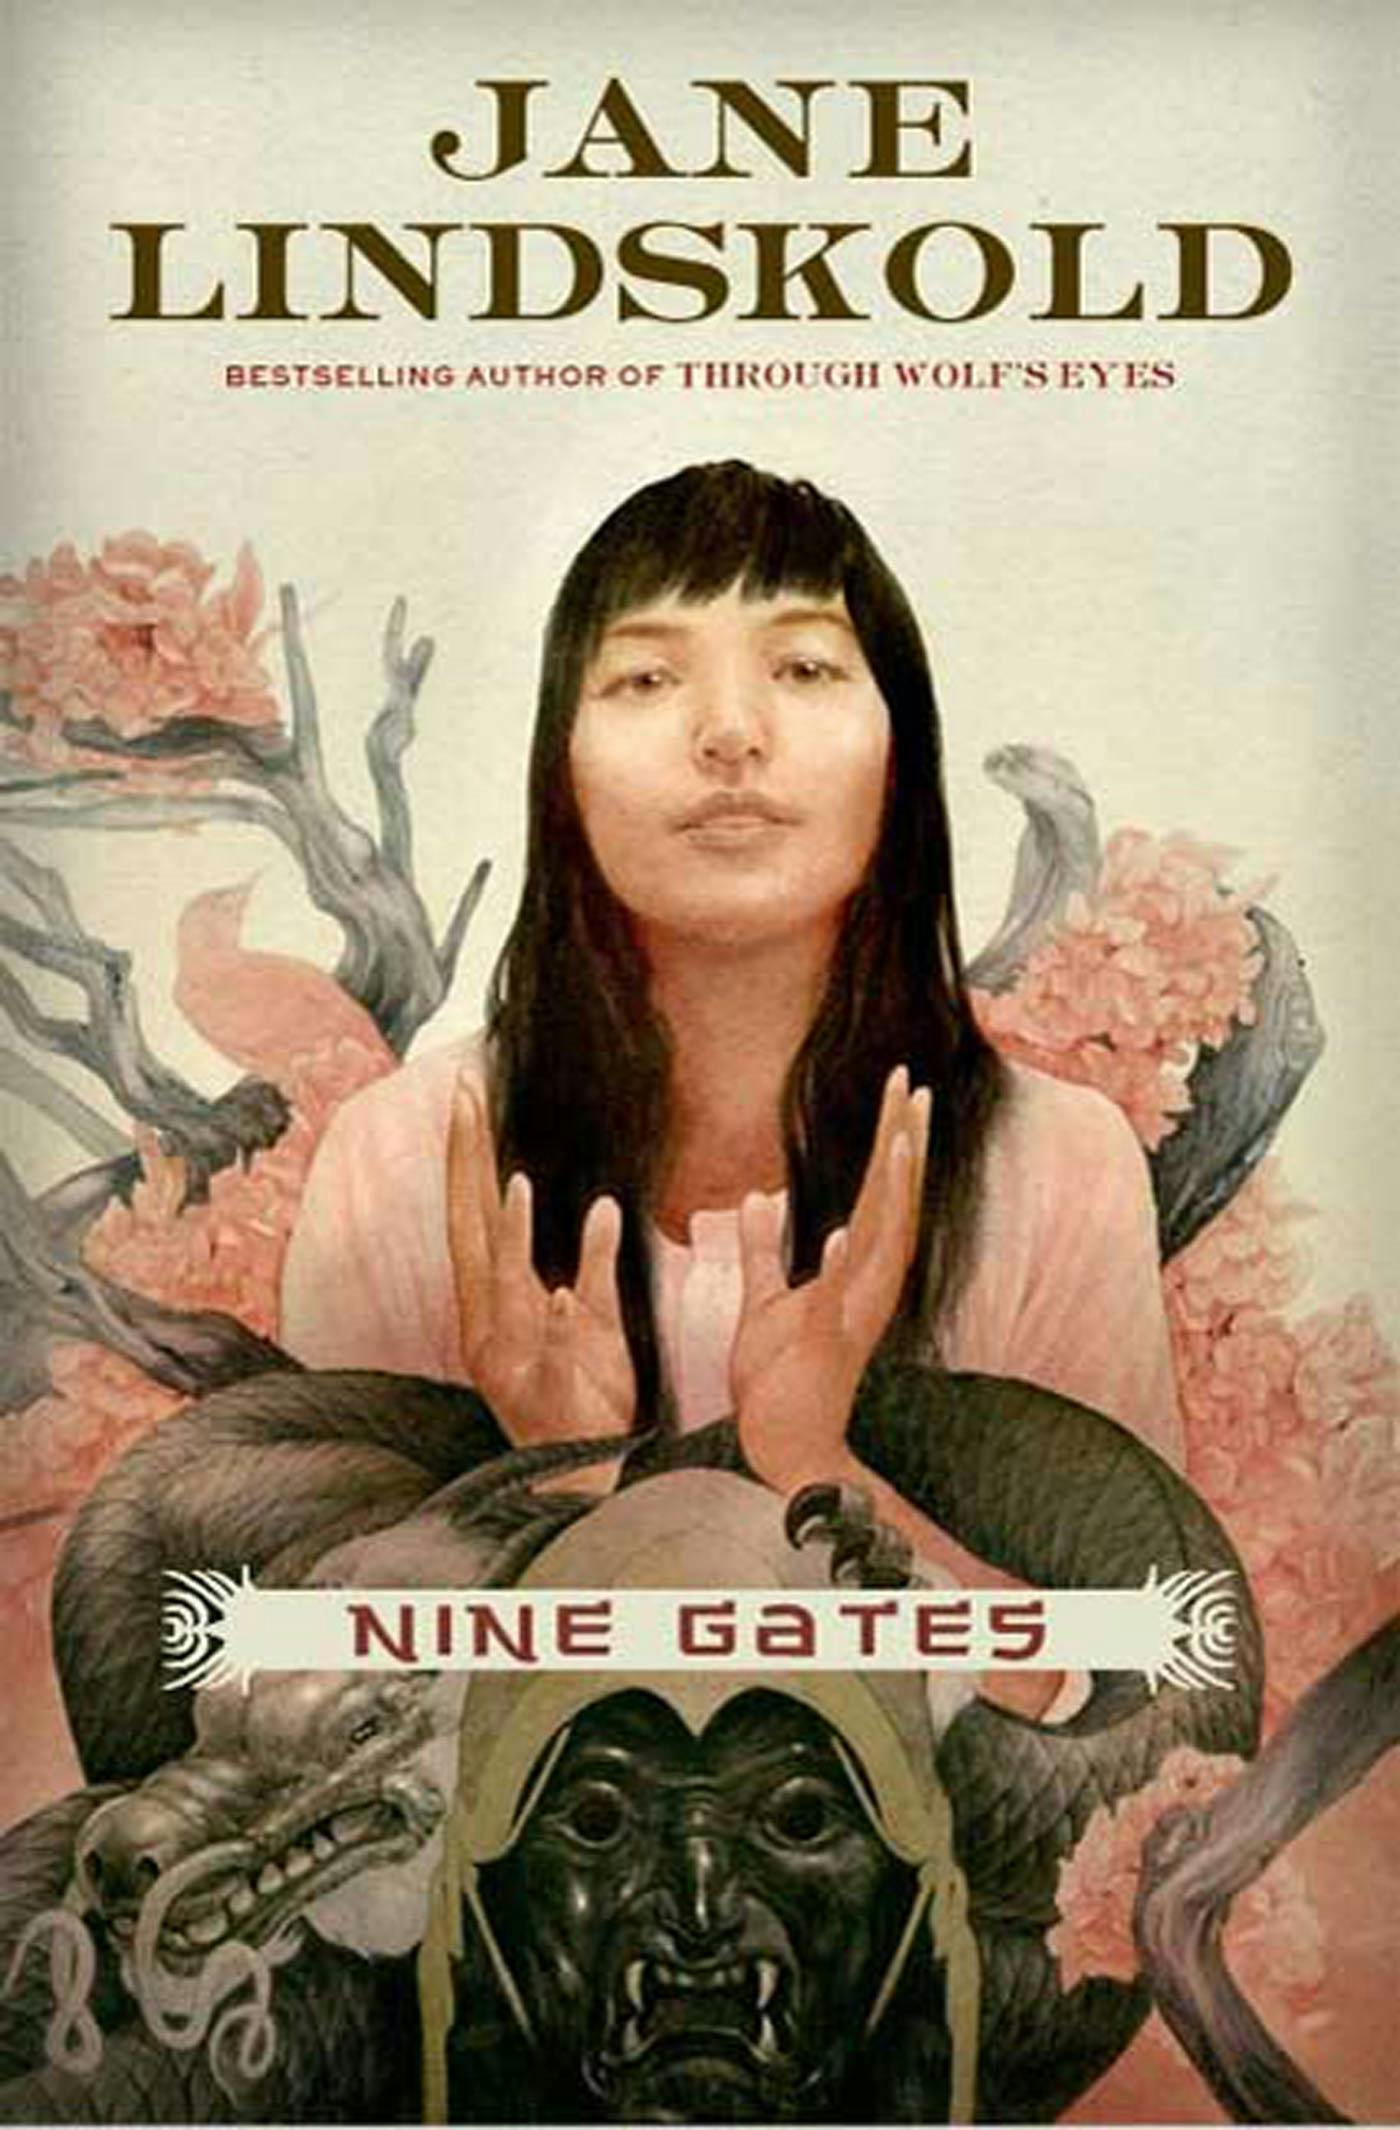 Cover for the book titled as: Nine Gates